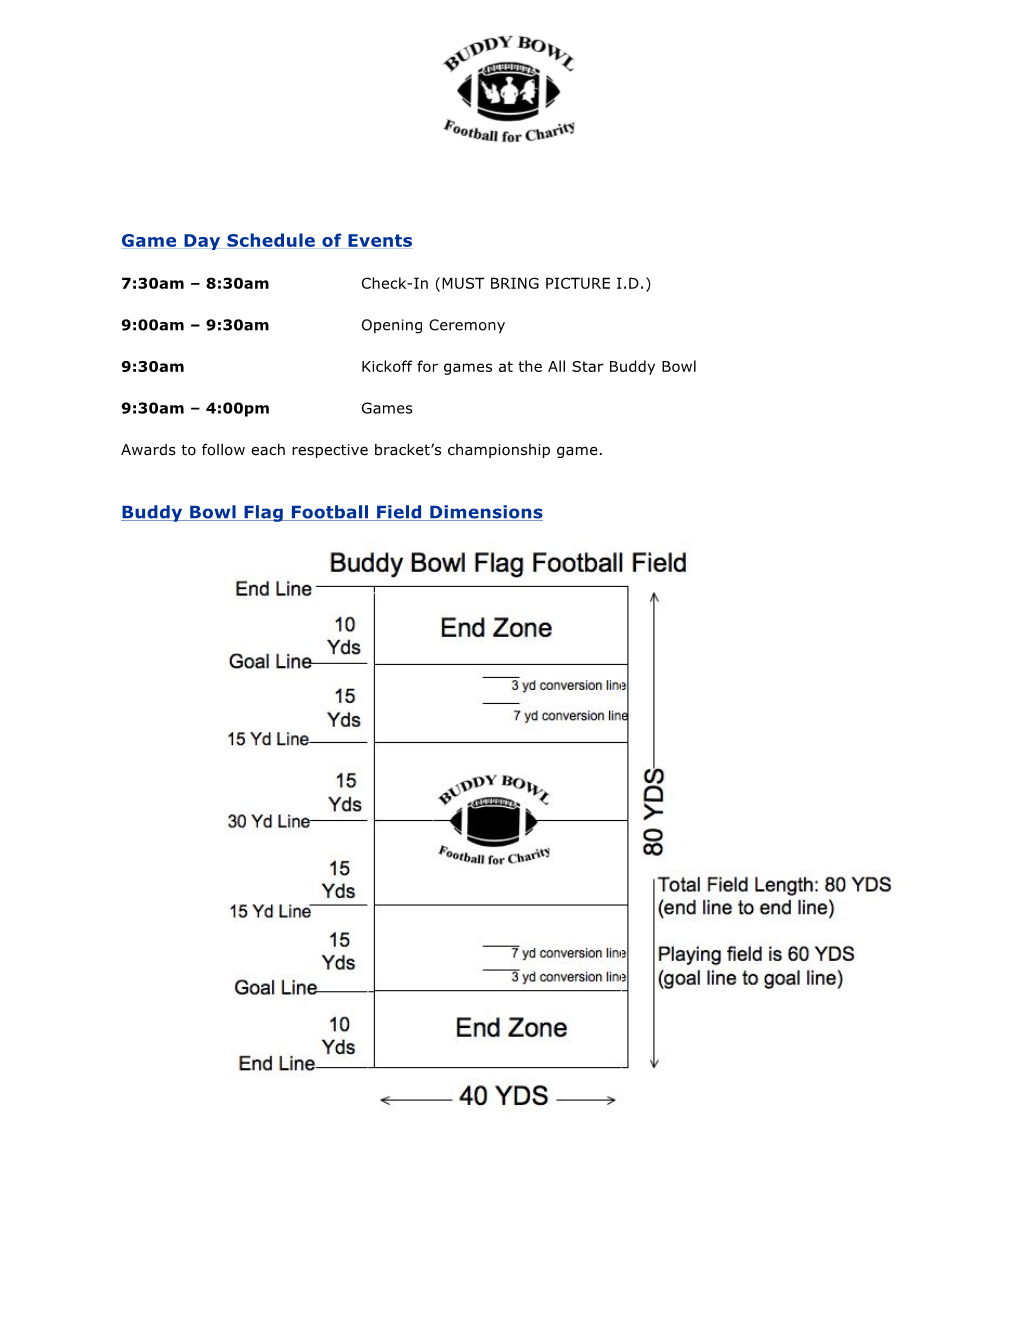 Game Day Schedule of Events Buddy Bowl Flag Football Field Dimensions